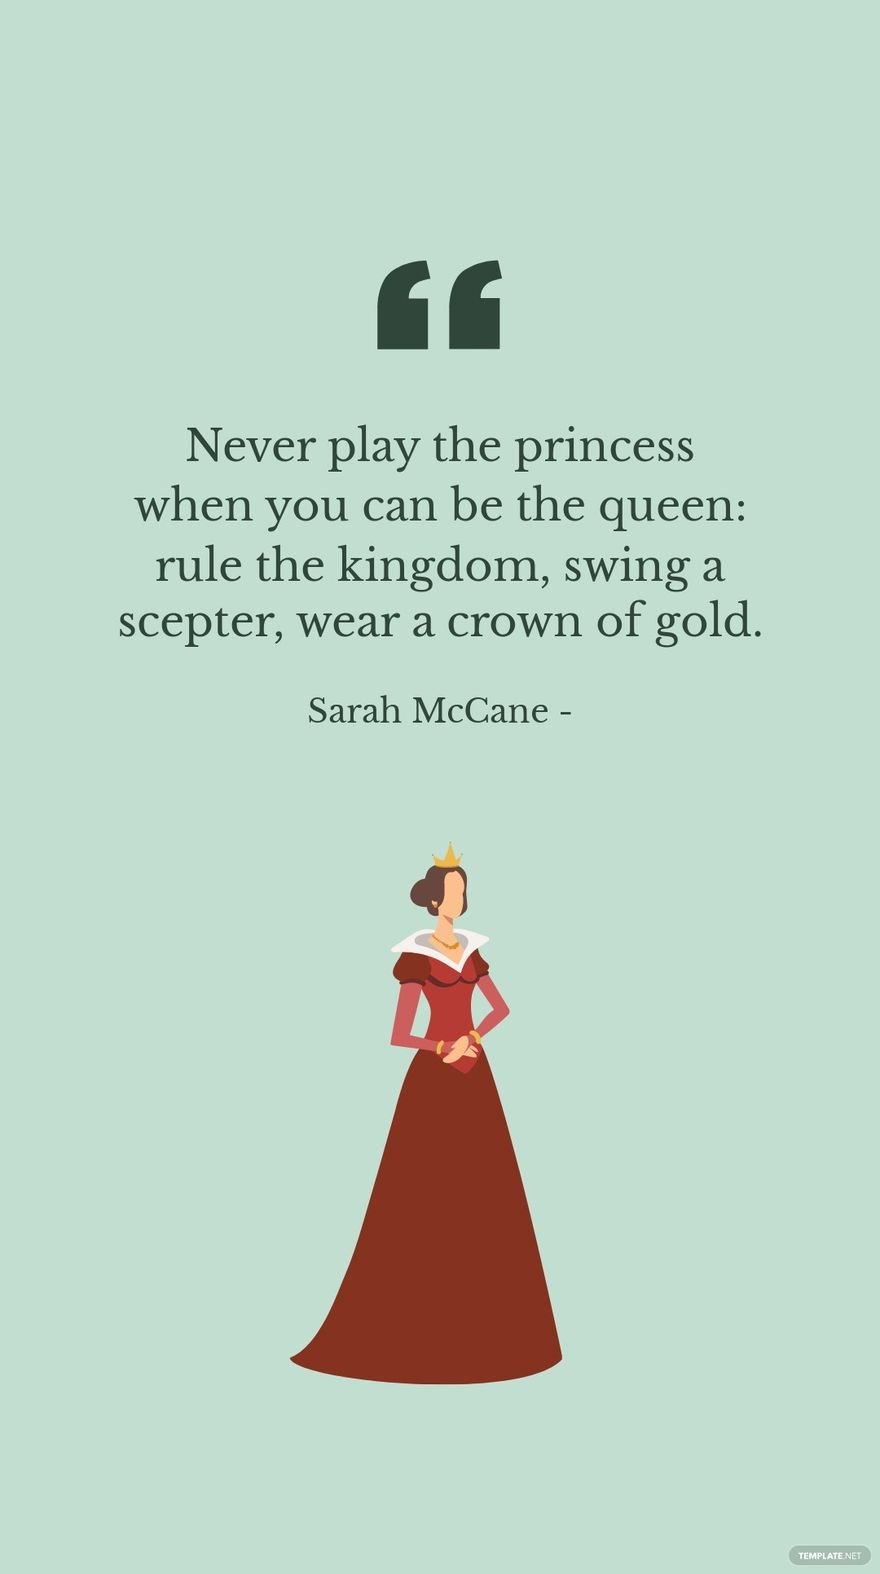 Sarah McCane - Never play the princess when you can be the queen: rule the kingdom, swing a scepter, wear a crown of gold. in JPG